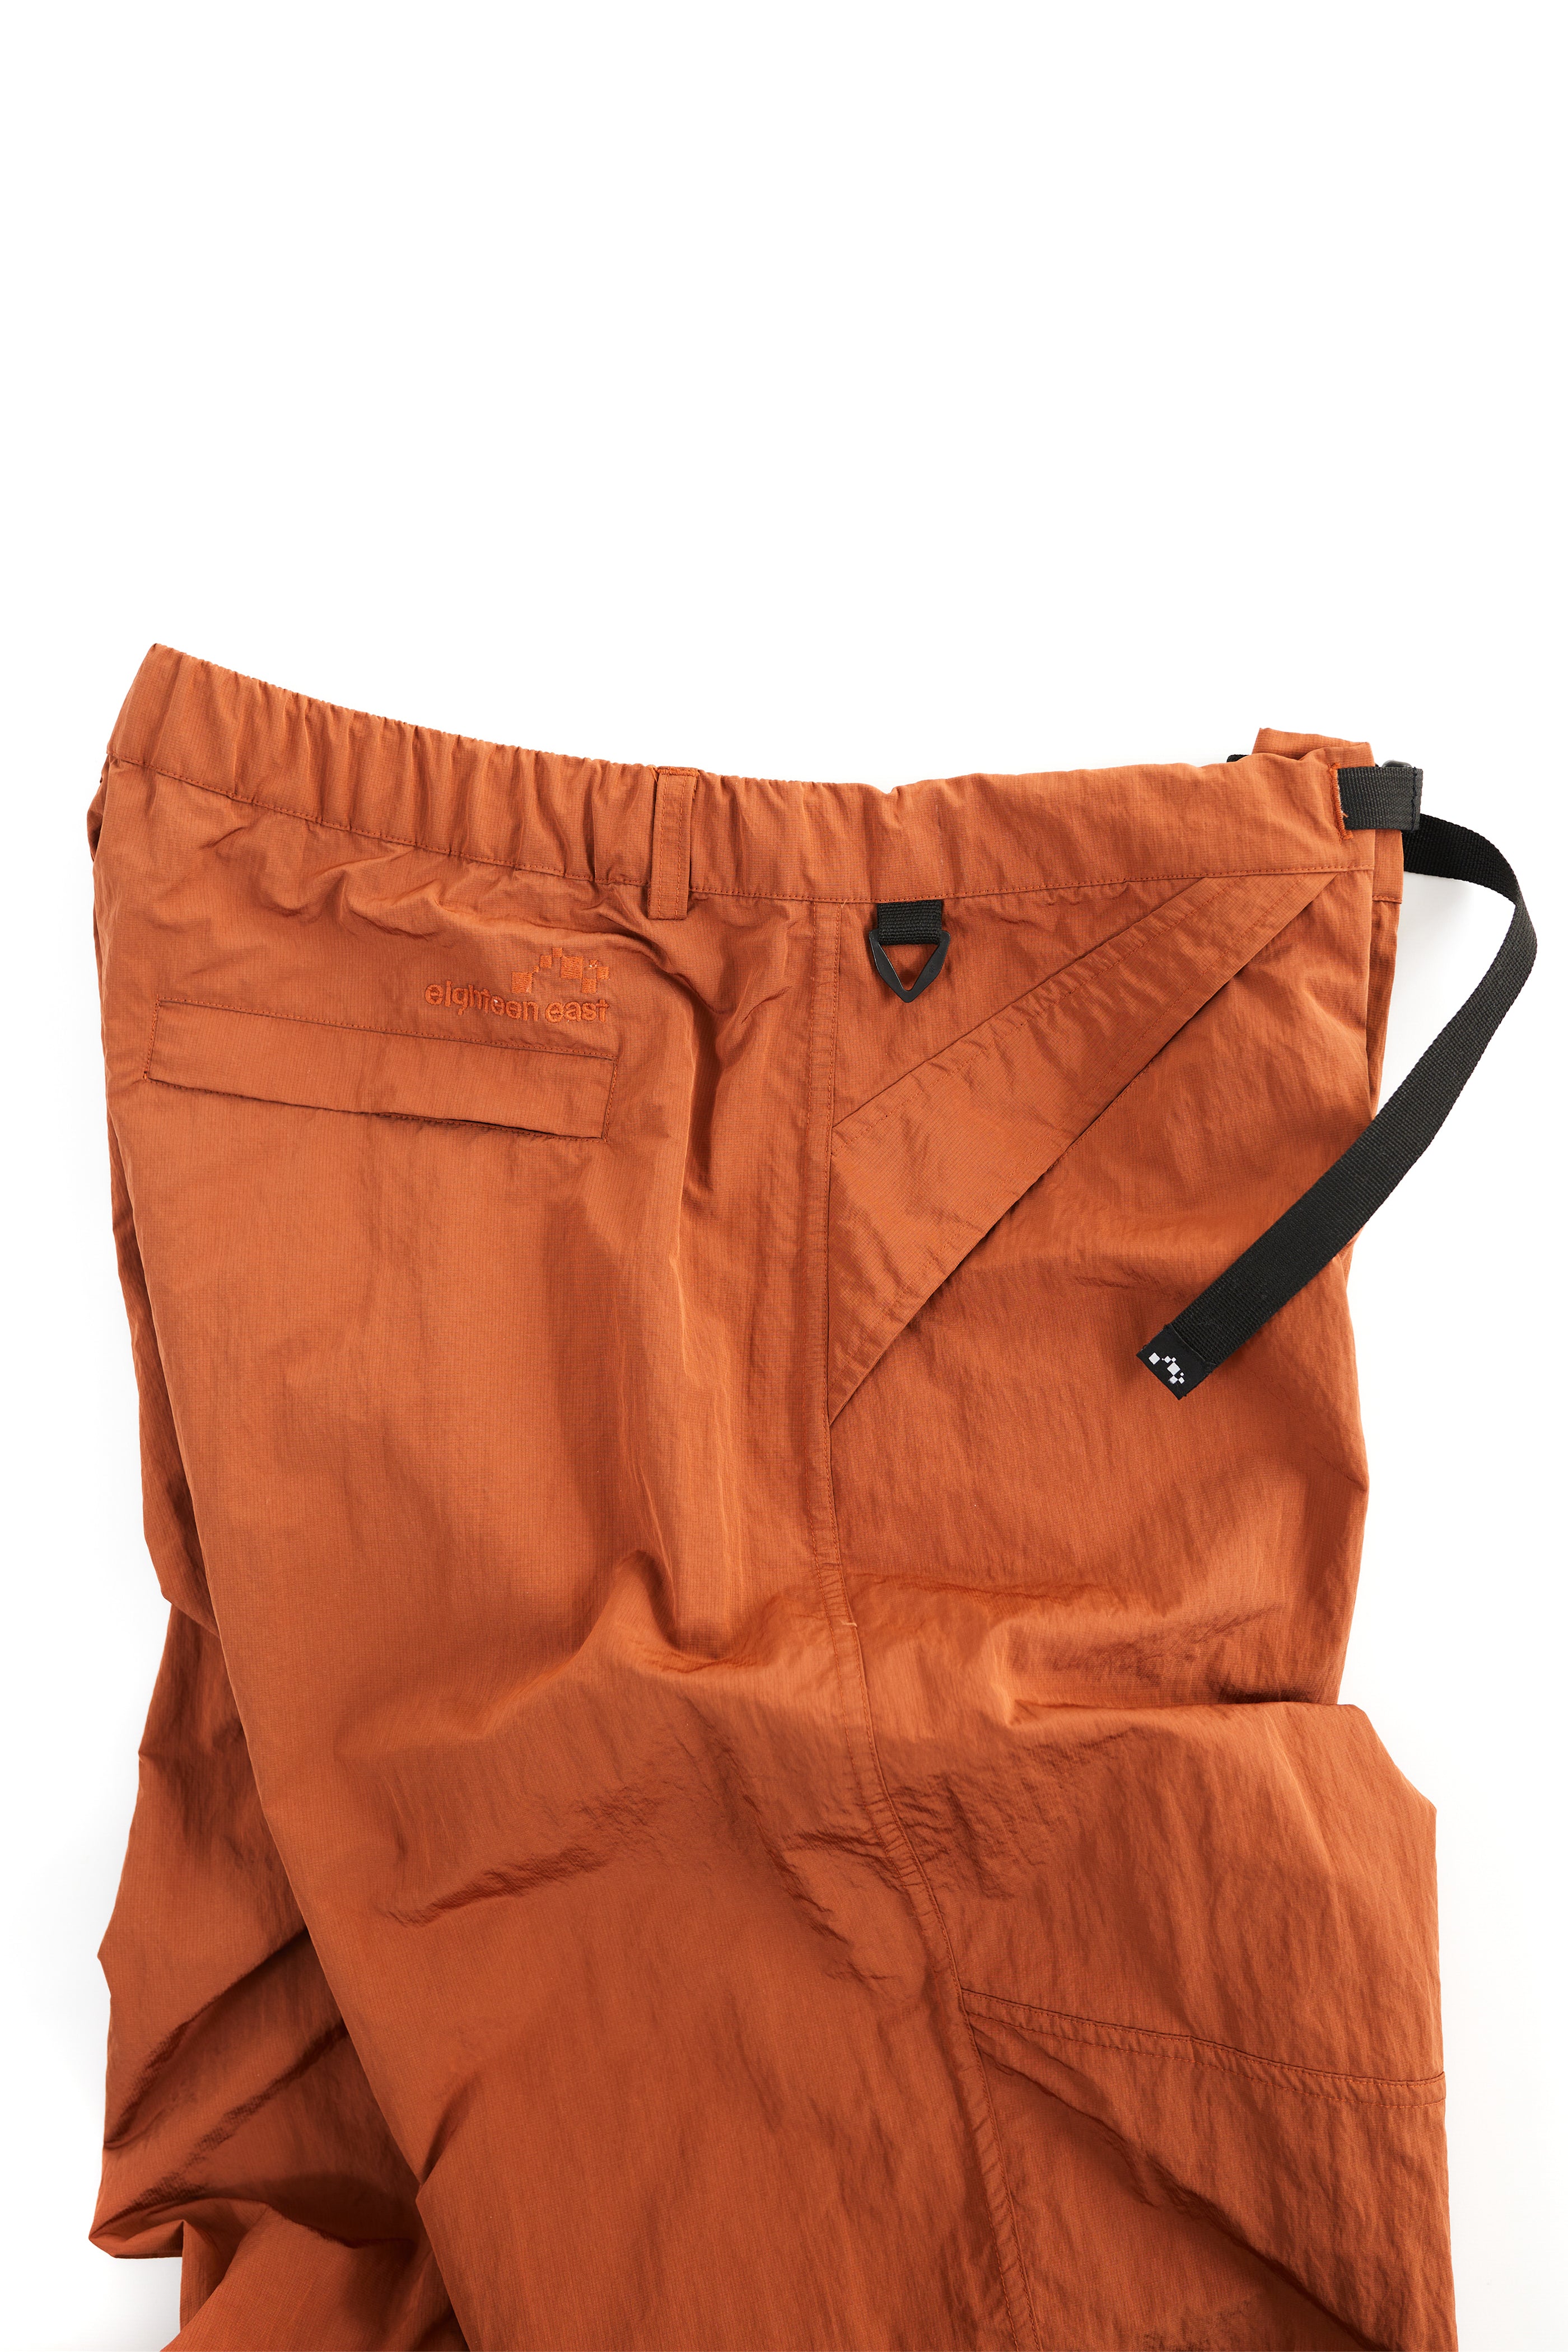 RAINSHADOW OUTDOOR PROTECTION SYSTEM TRAIL PANT - BRICK WATER-REPELLENT MICRO RIPSTOP NYLON